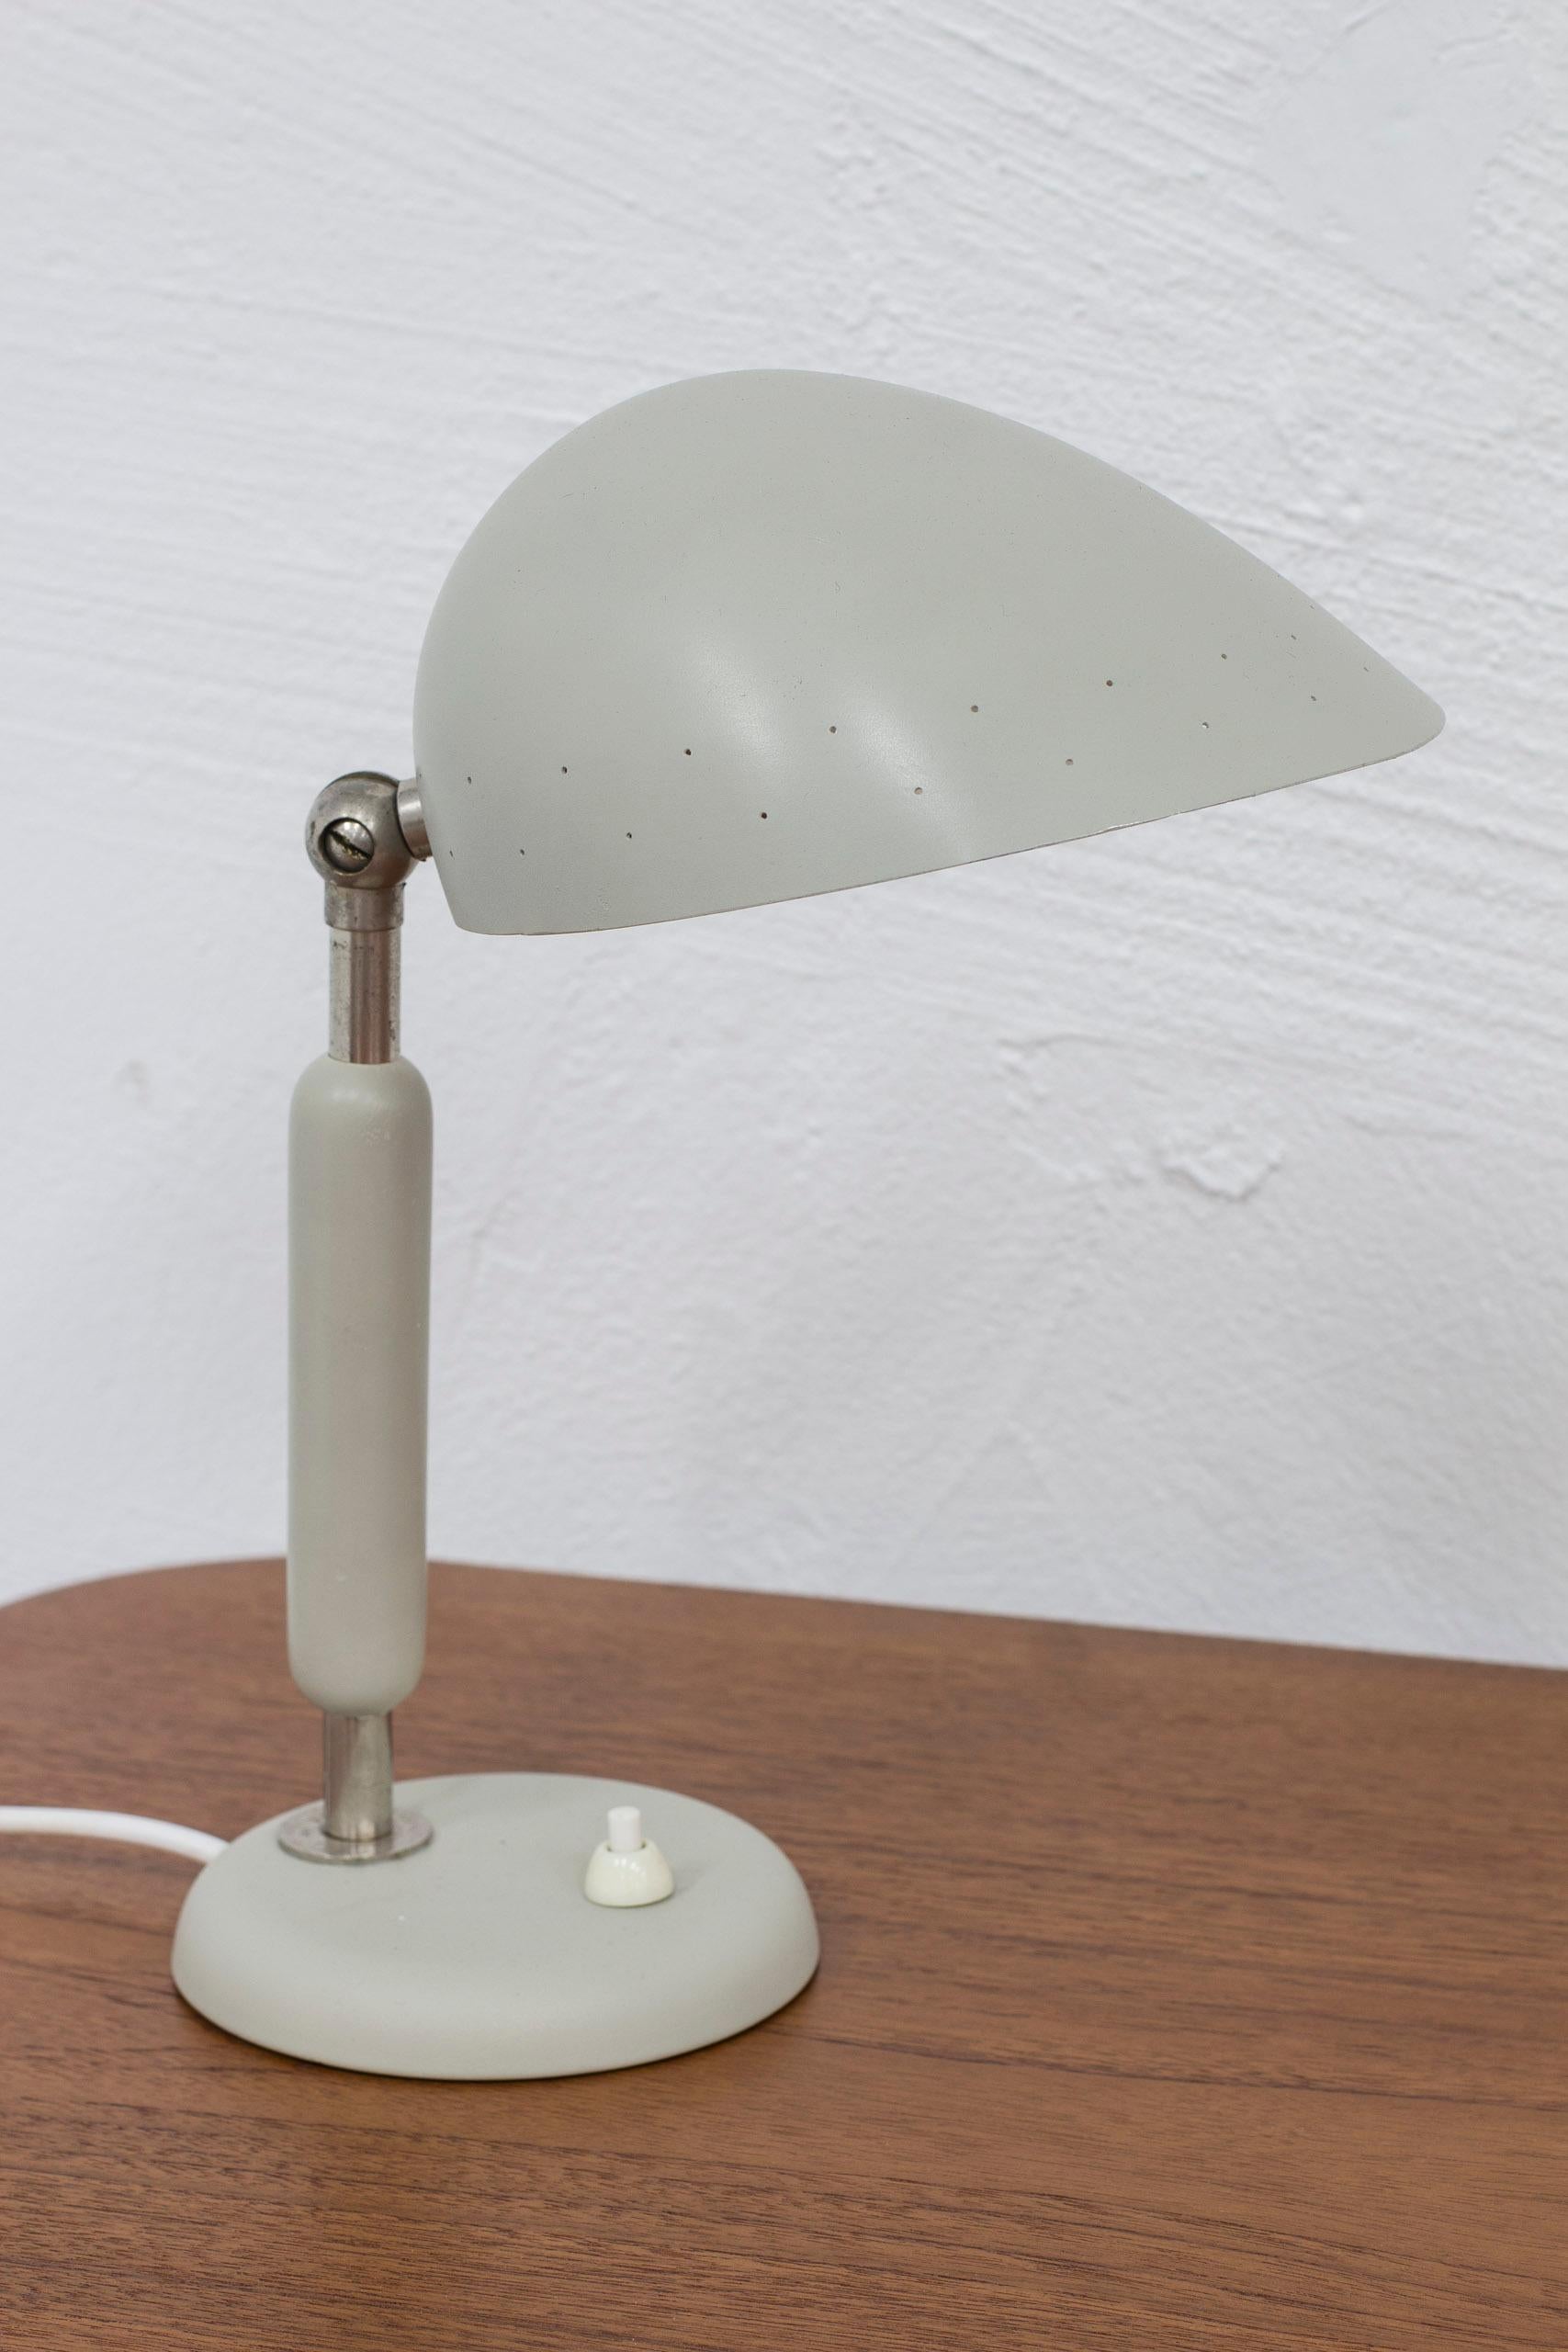 Table lamp designed by Harald Notini. Produced in Stockholmn, Sweden by Böhlmarks lampfabrik during the 1940-50s. Made from nickel plated metal, lacquered wood and aluminum. Light switch on the base in working order. Adjustable shade. Good vintage